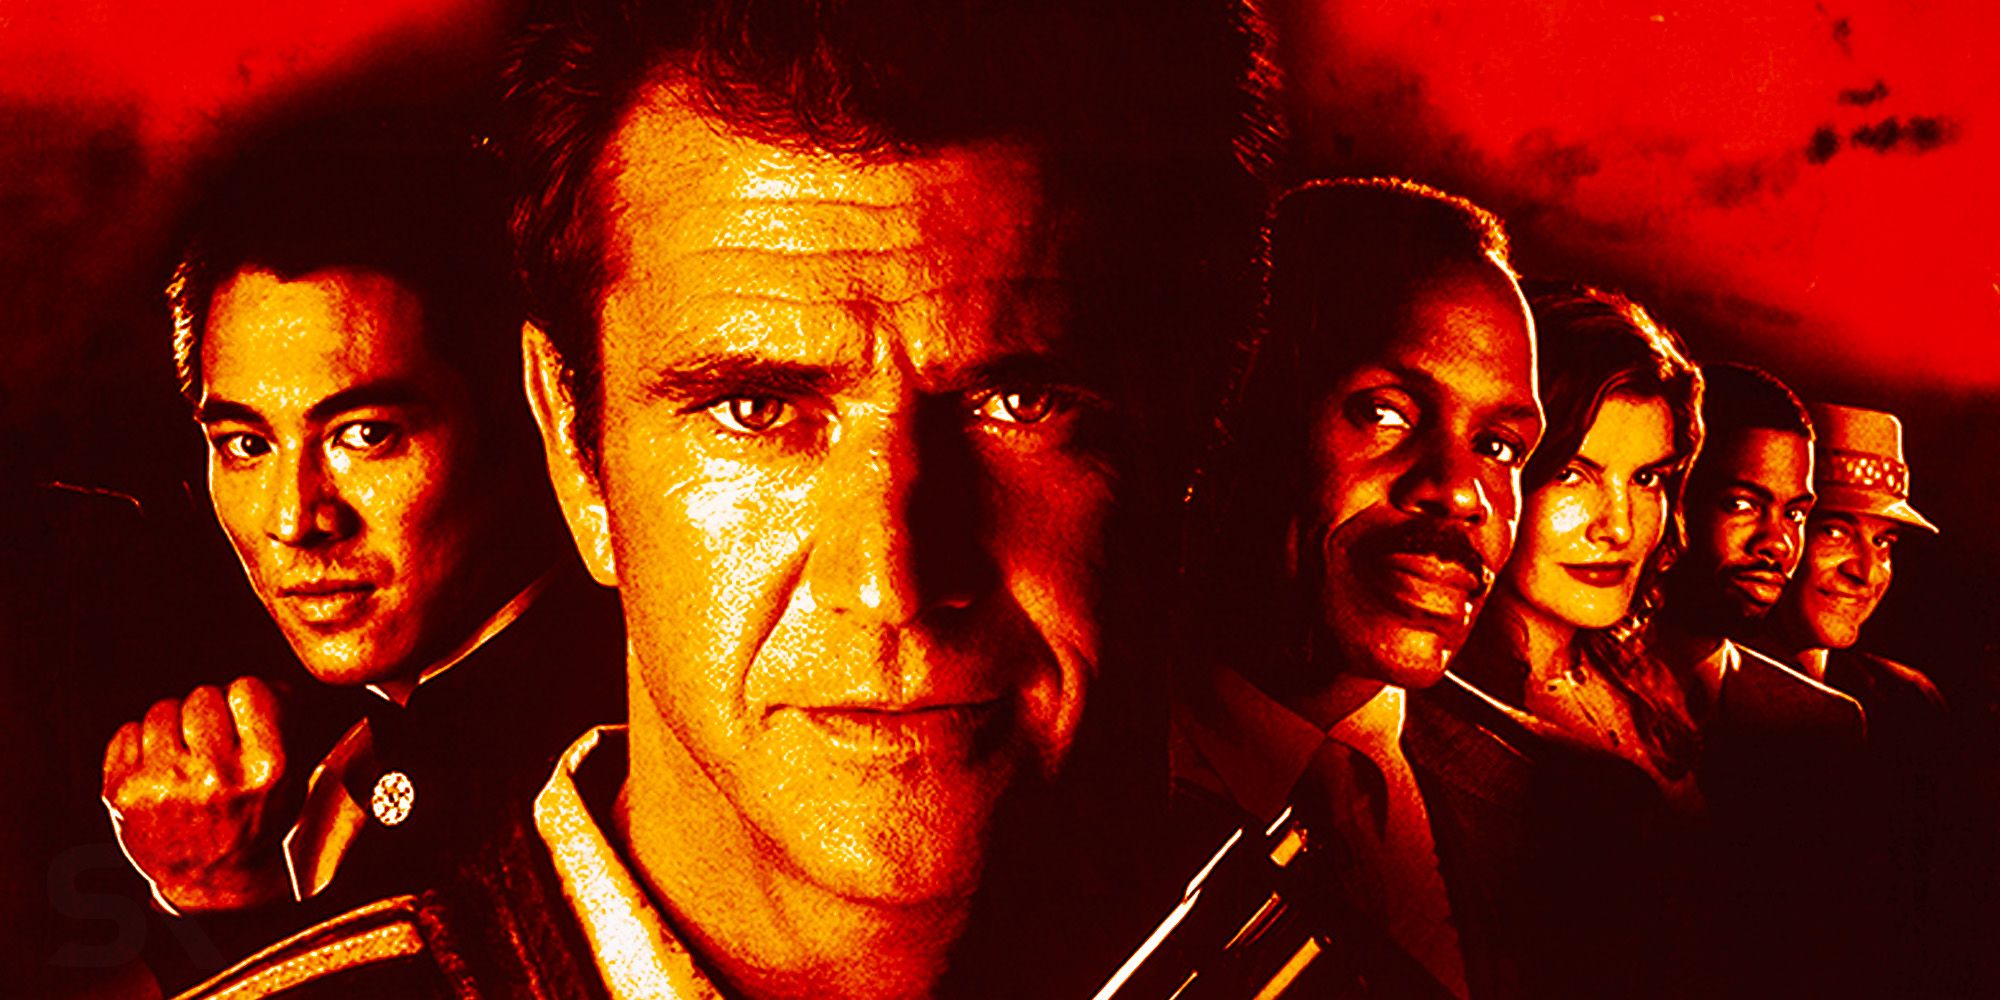 Lethal Weapon 5 Has To Redeem The Franchise After The Fourth Film